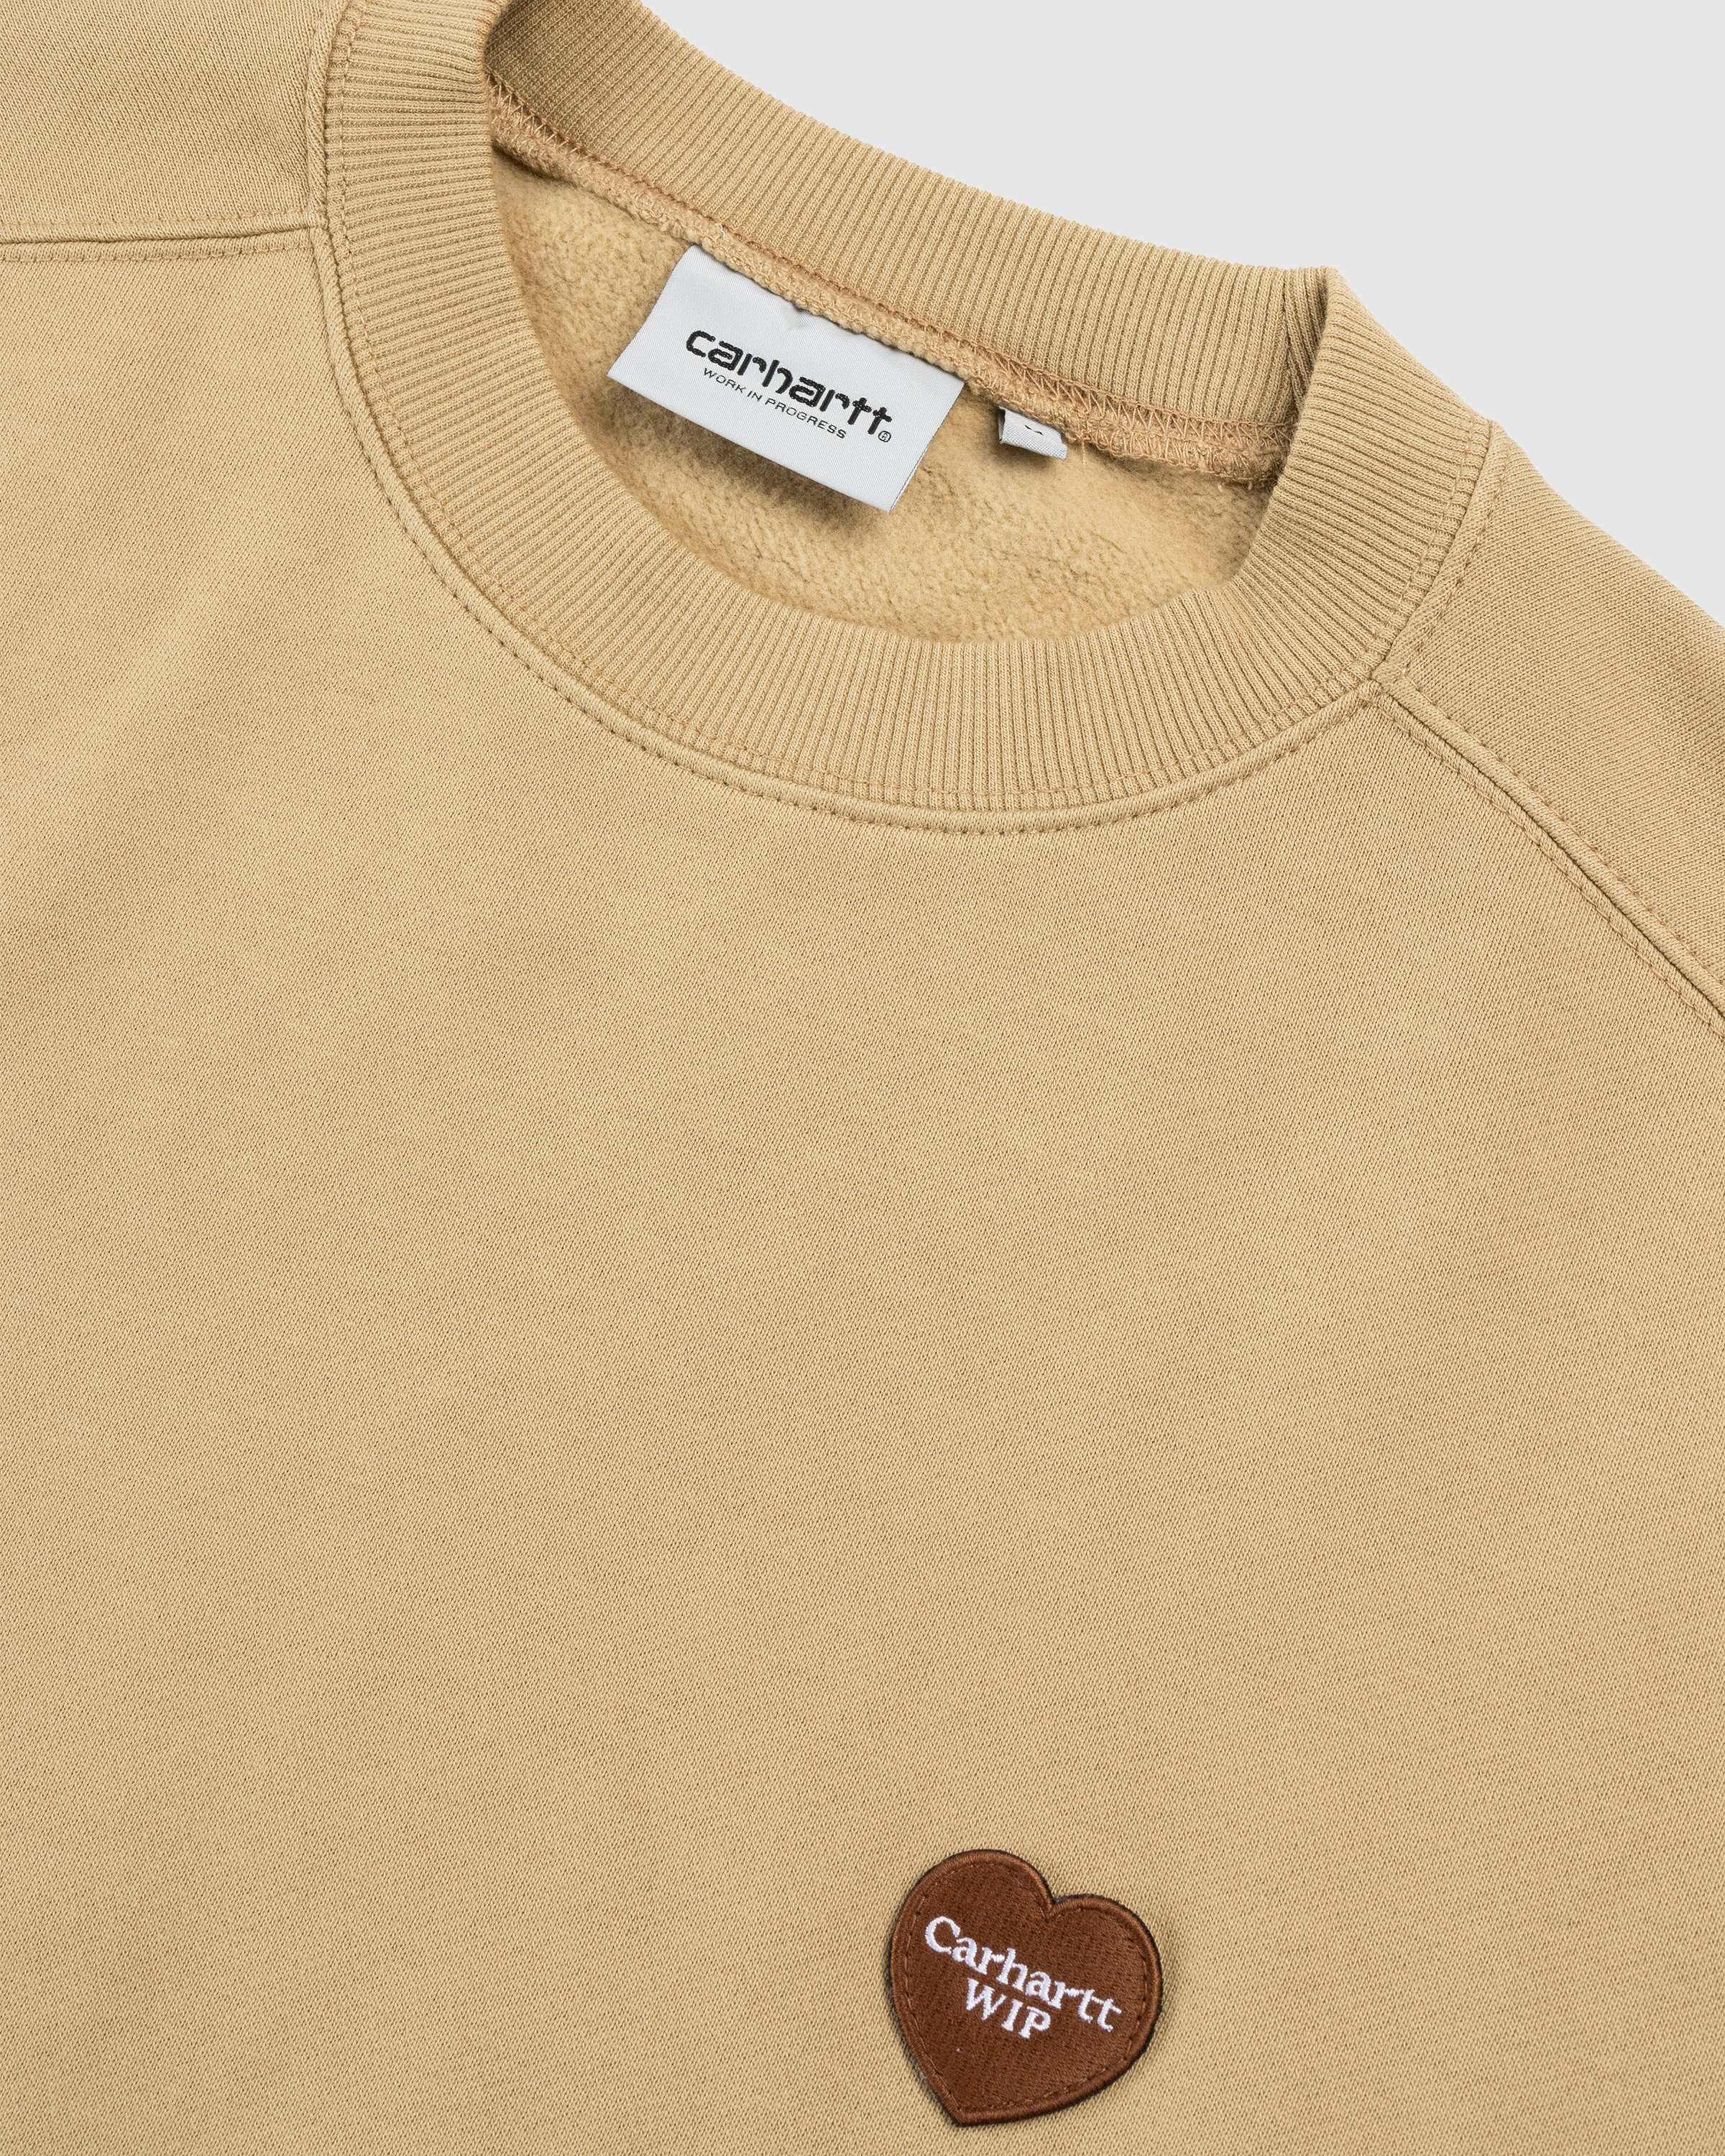 Carhartt WIP - Heart Patch Sweat Dusty Hamilton Brown - Clothing - Brown - Image 5